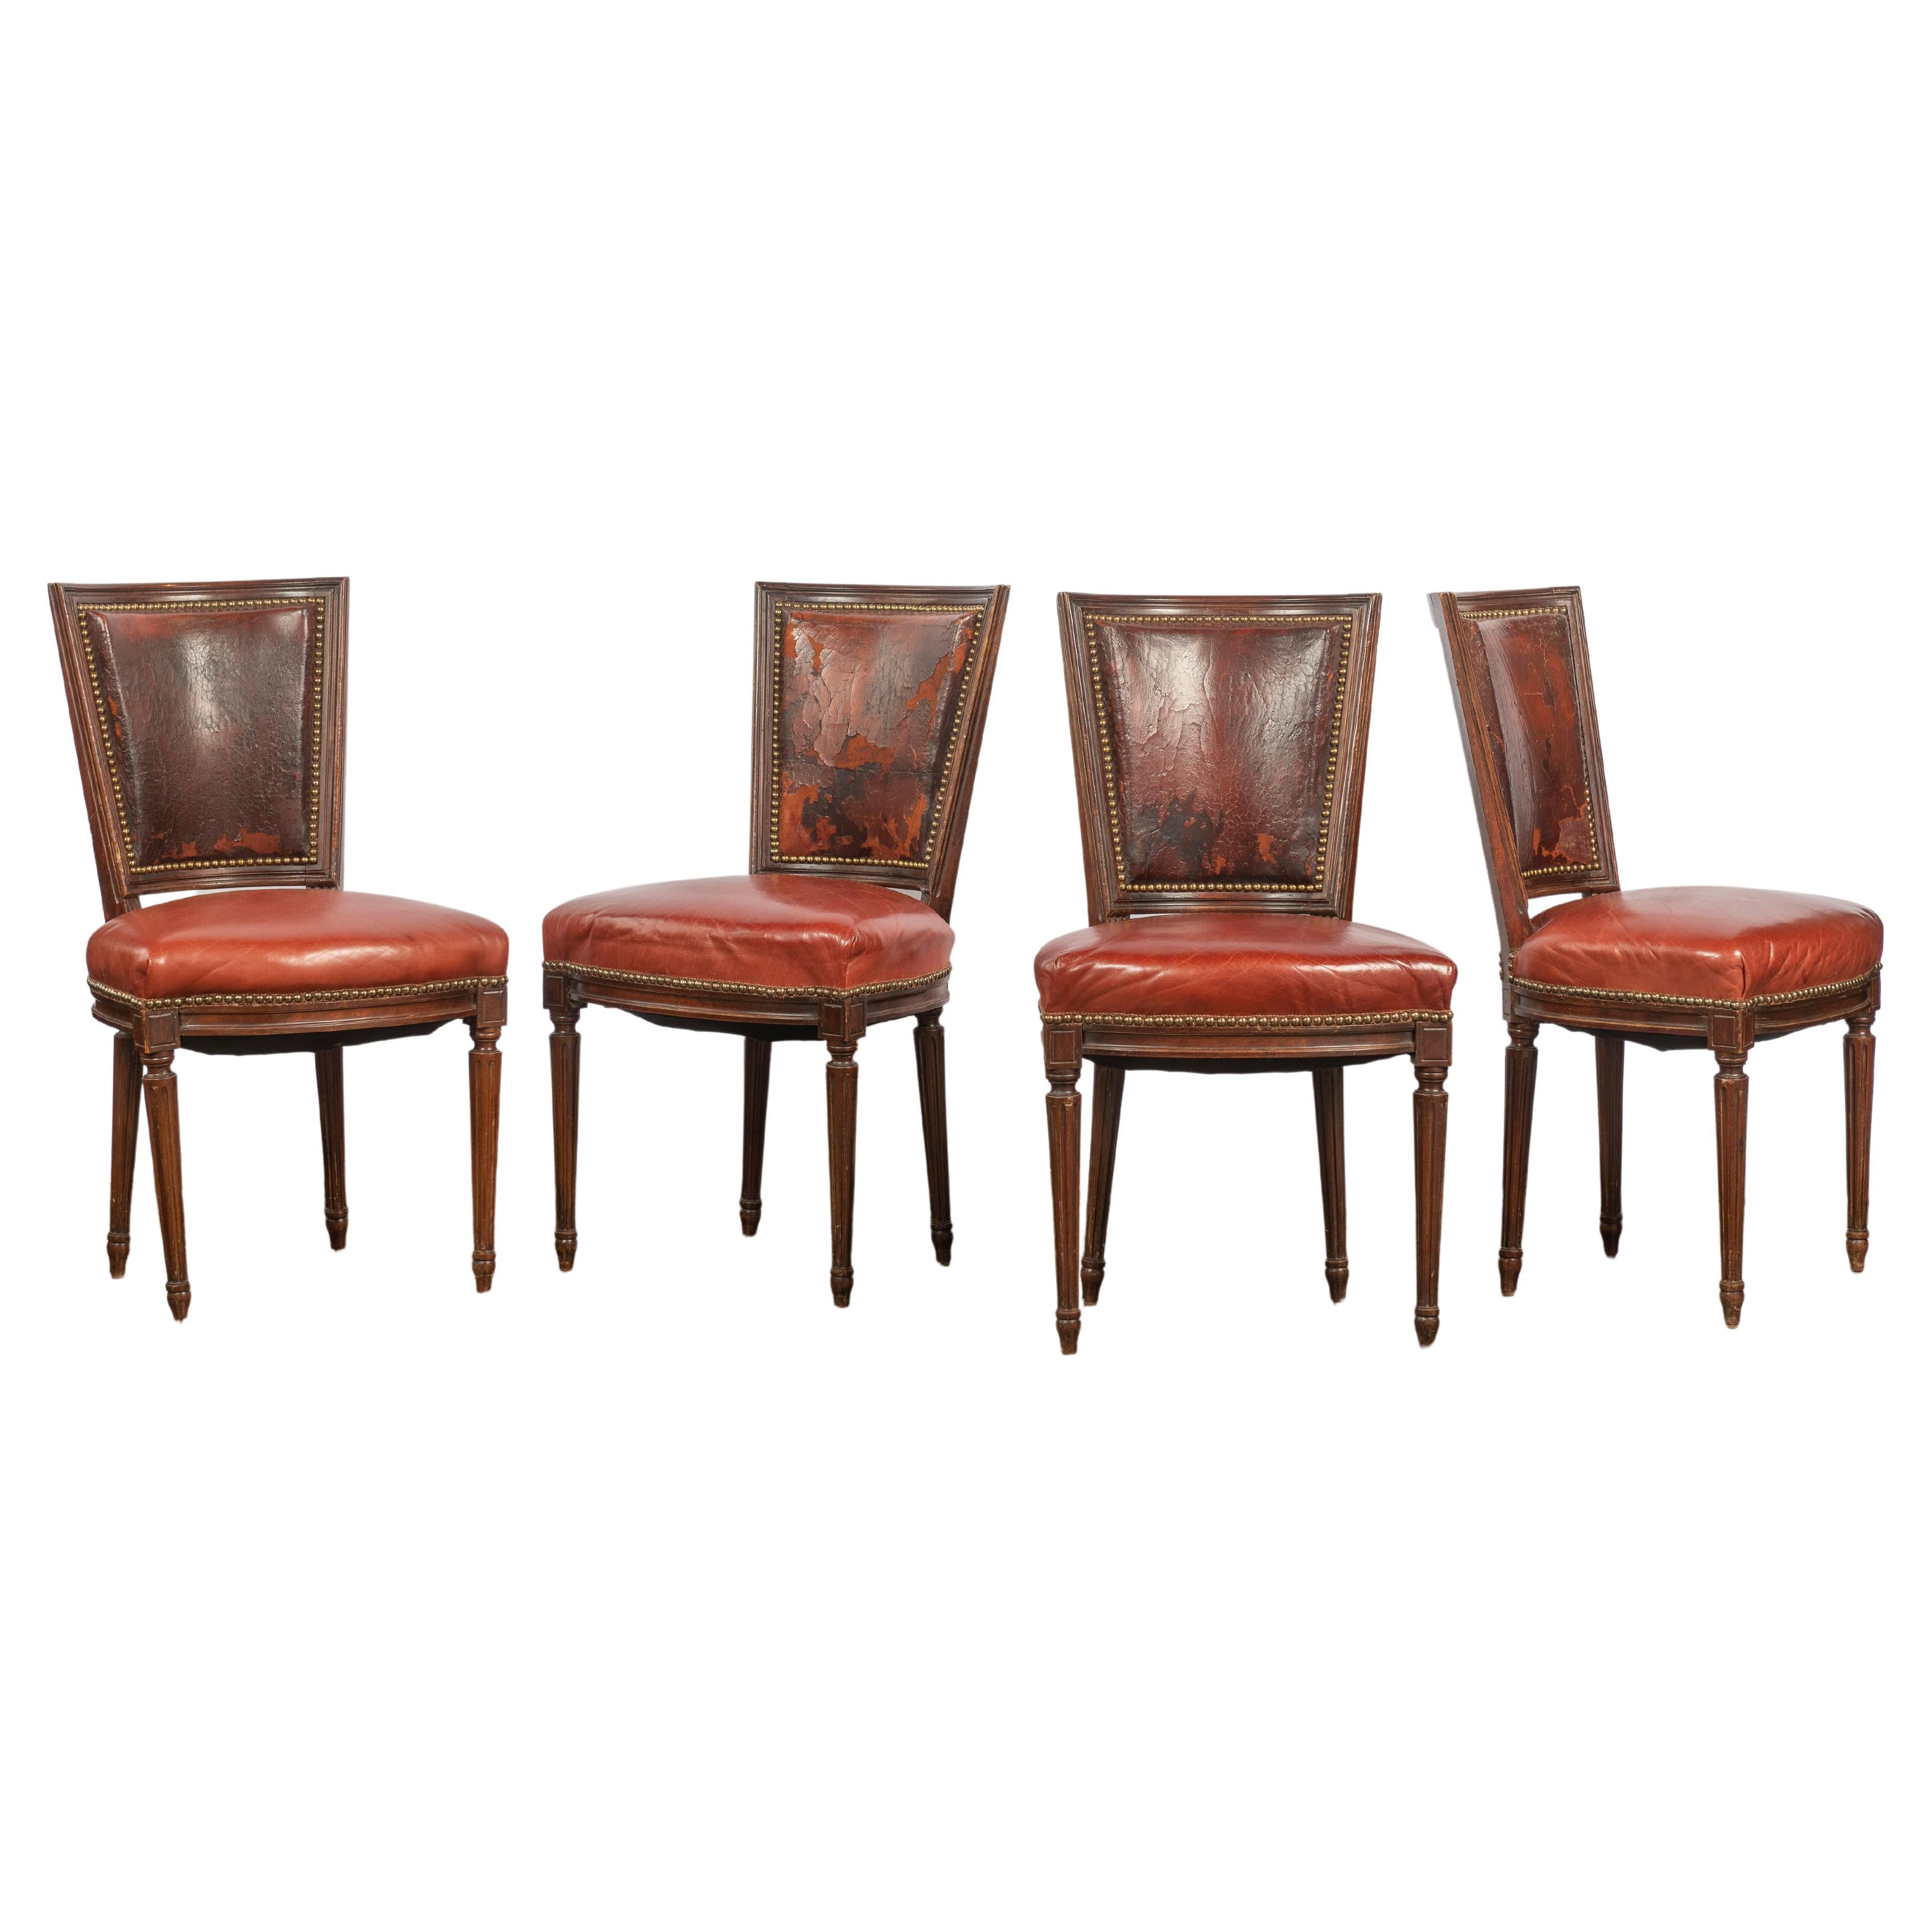 Set of Four Vintage Louis XVI Style Dining Chairs Upholstered in Leather